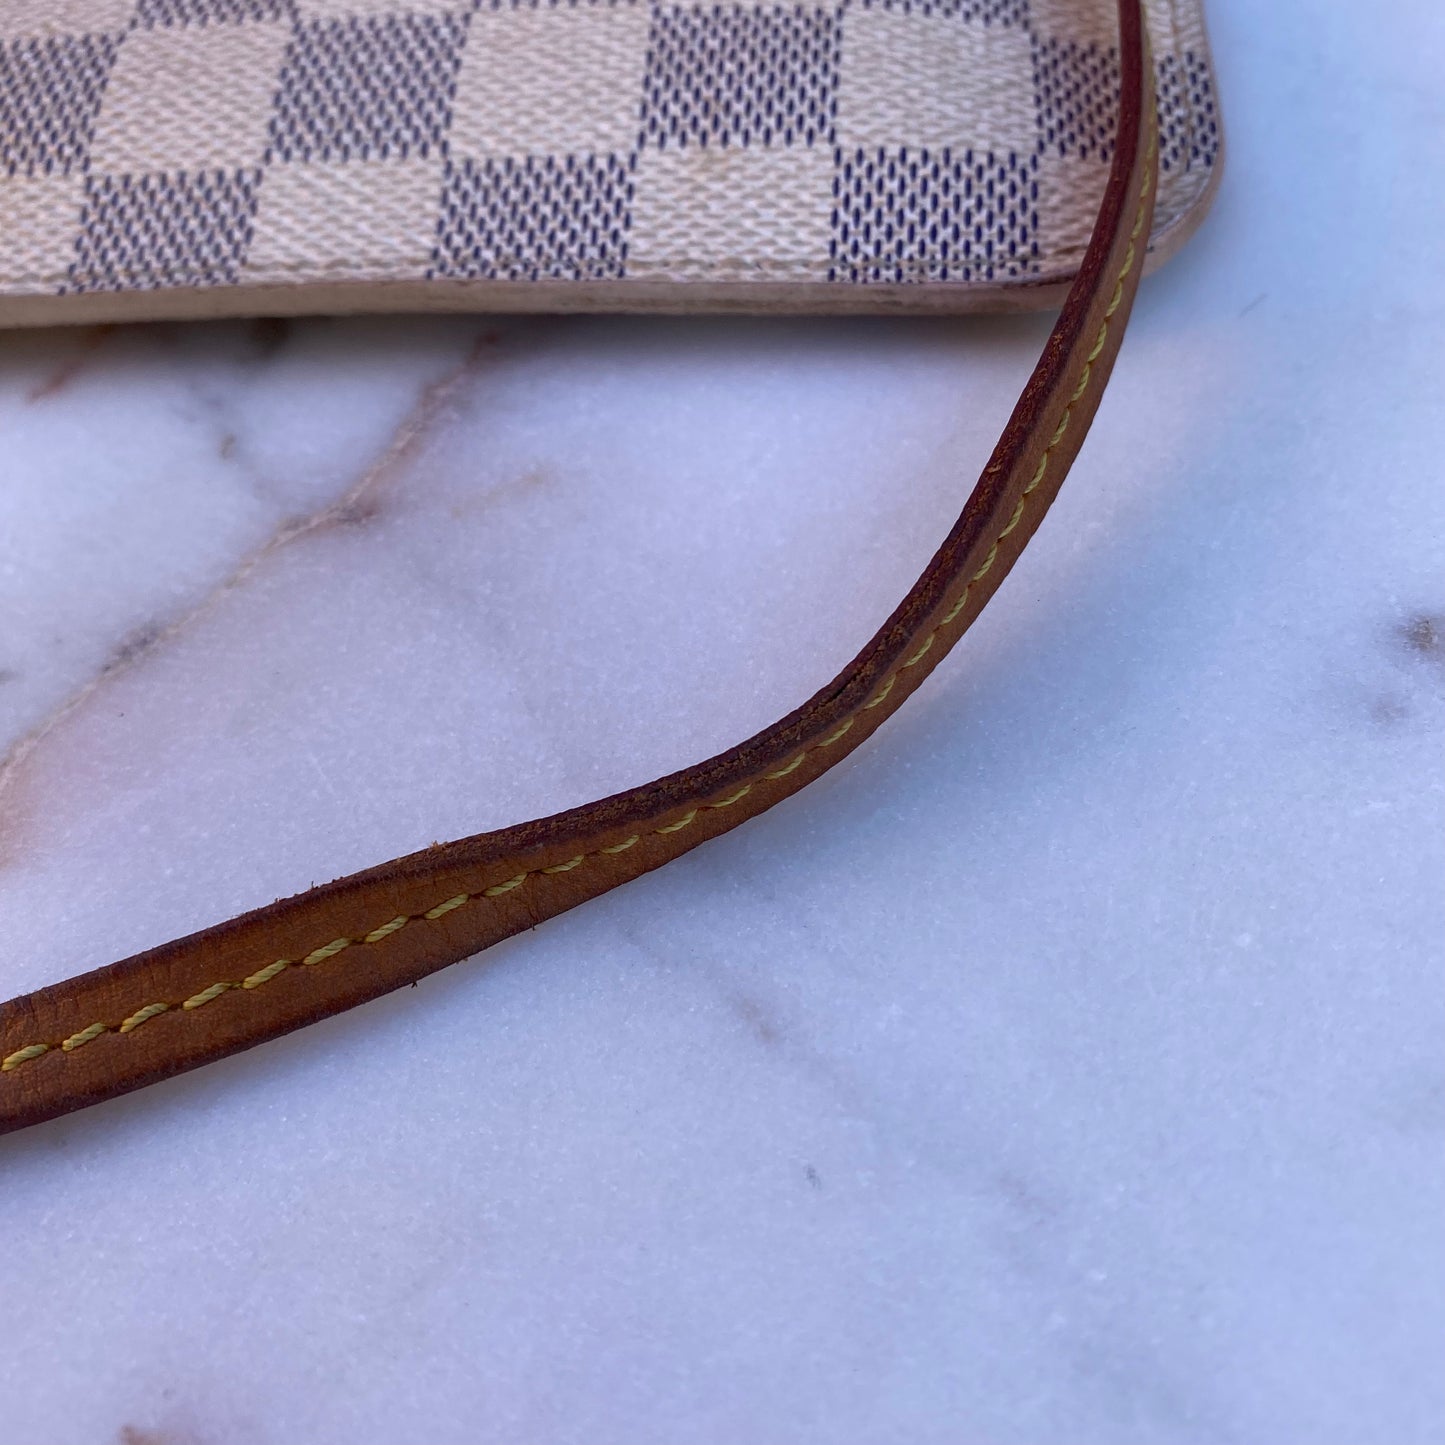 Louis Vuitton Damier Azur Neverfull GM with Pouch